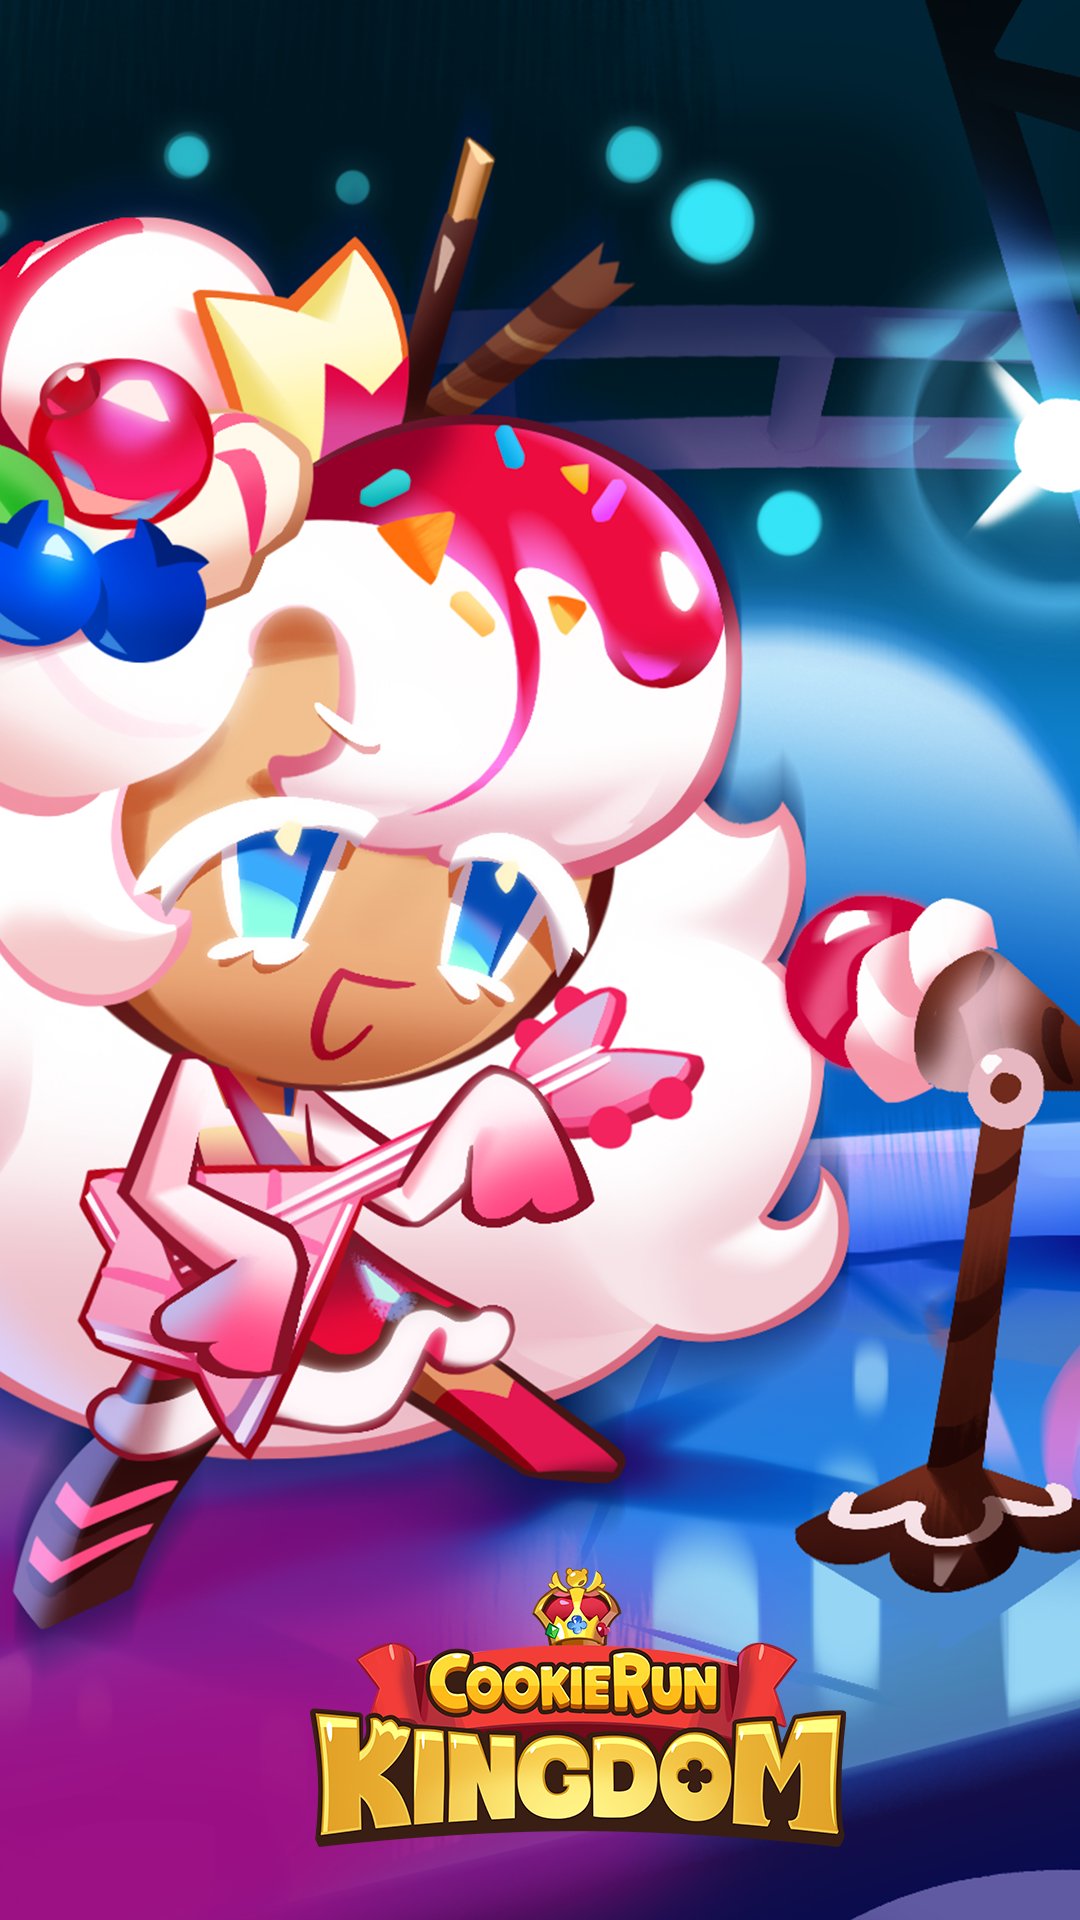 Cookie Run: Kingdom out these cute wallpaper of the Cookie Kingdom's rising star, Parfait Cookie !